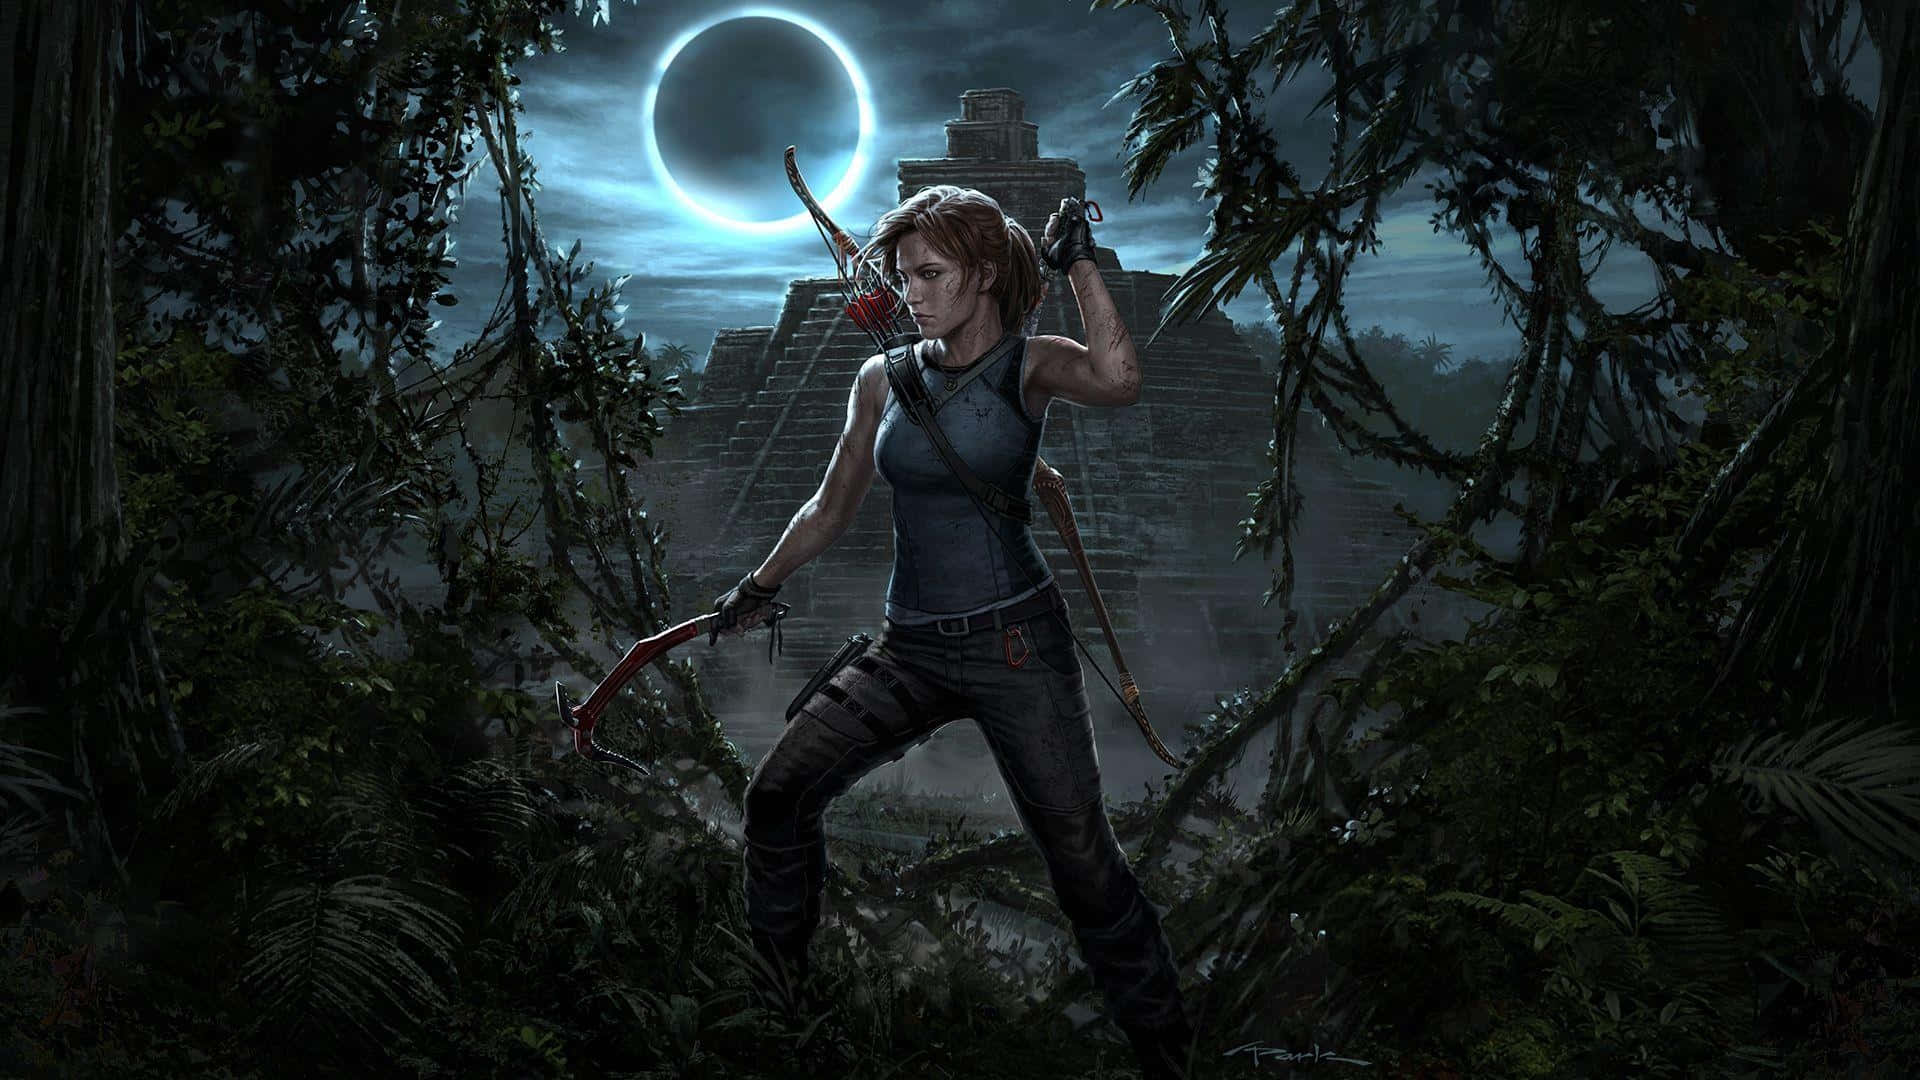 Lara Croft Emerges Ready For Adventure in Shadow Of The Tomb Raider